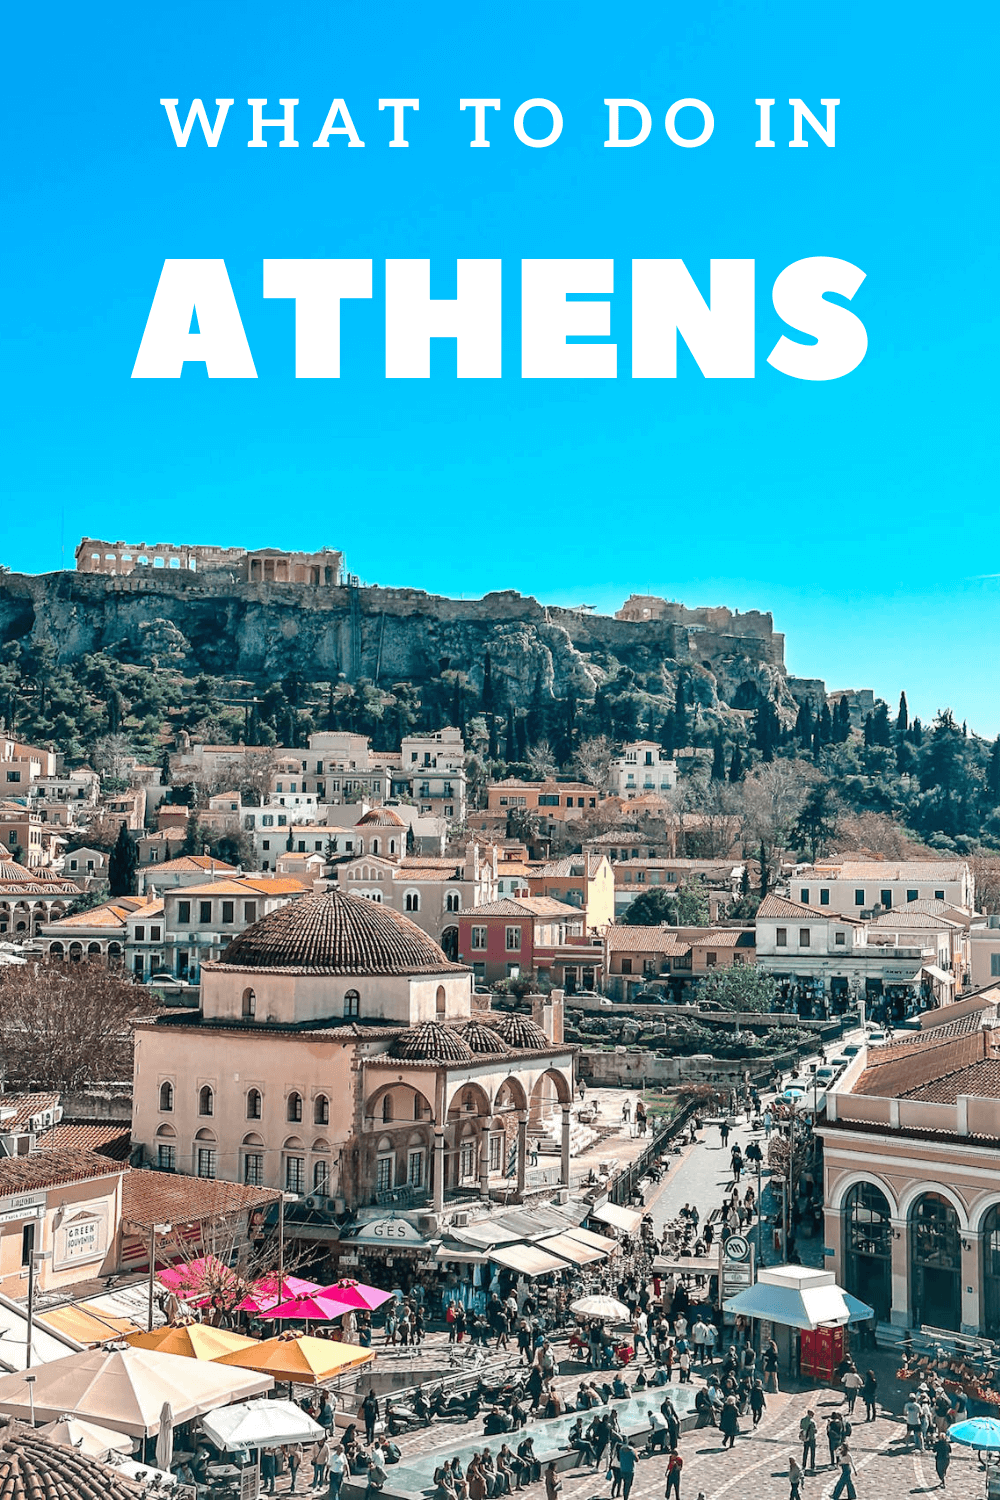 Athens Riviera: Coastal Area with Beaches and Restaurants